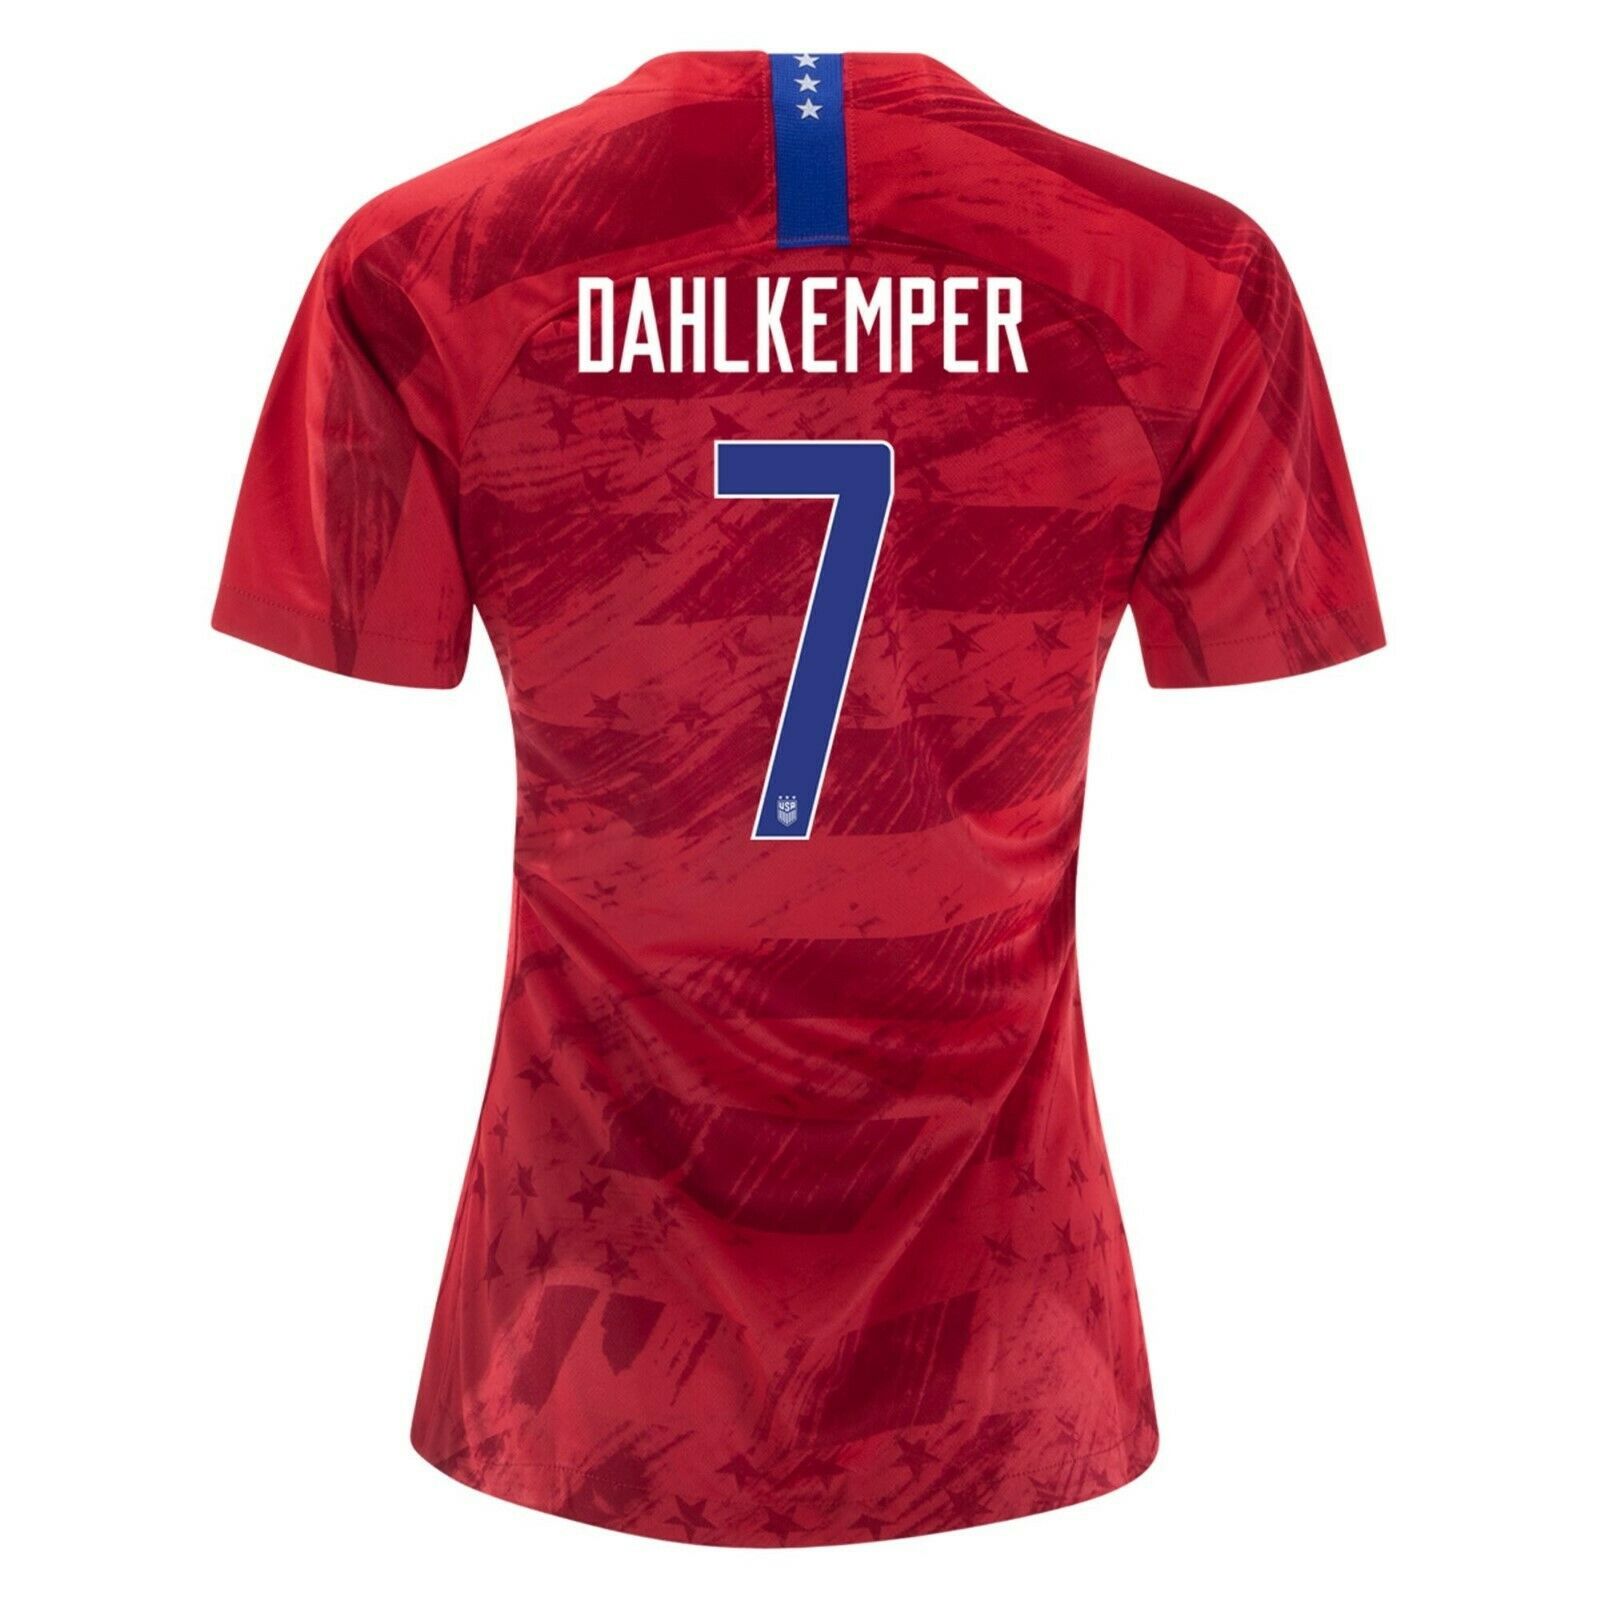 NIKE ABBY DAHLKEMPER 7 USA 2019 WORLD CUP 3 STAR WOMEN'S RED WOMENS JERSEY PATCH - $69.99